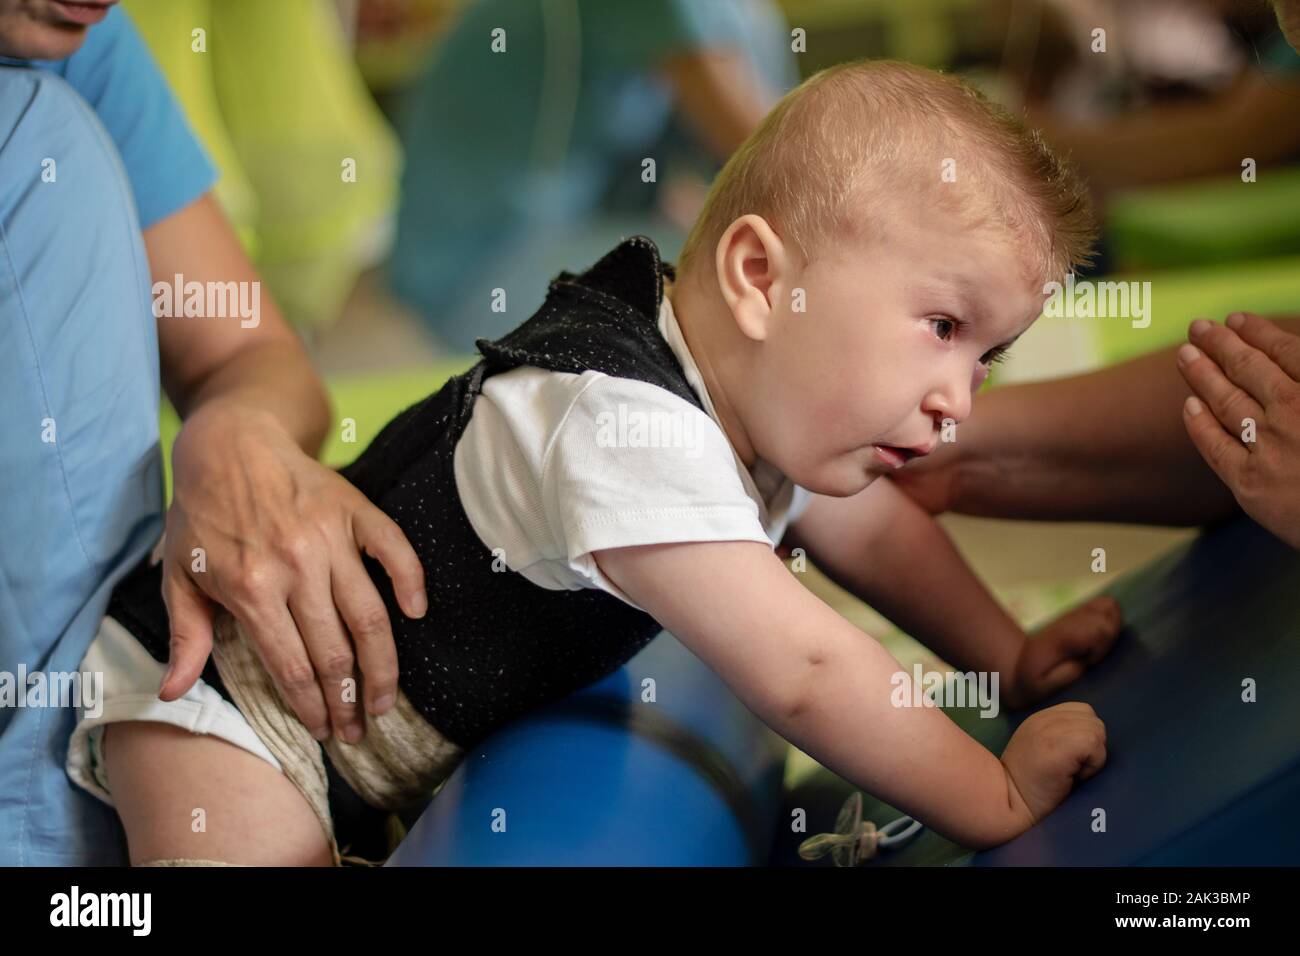 Portrait of a baby with cerebral palsy on physiotherapy in children therapy center. Boy with disability has therapy by doing exercises. Special needs. Stock Photo